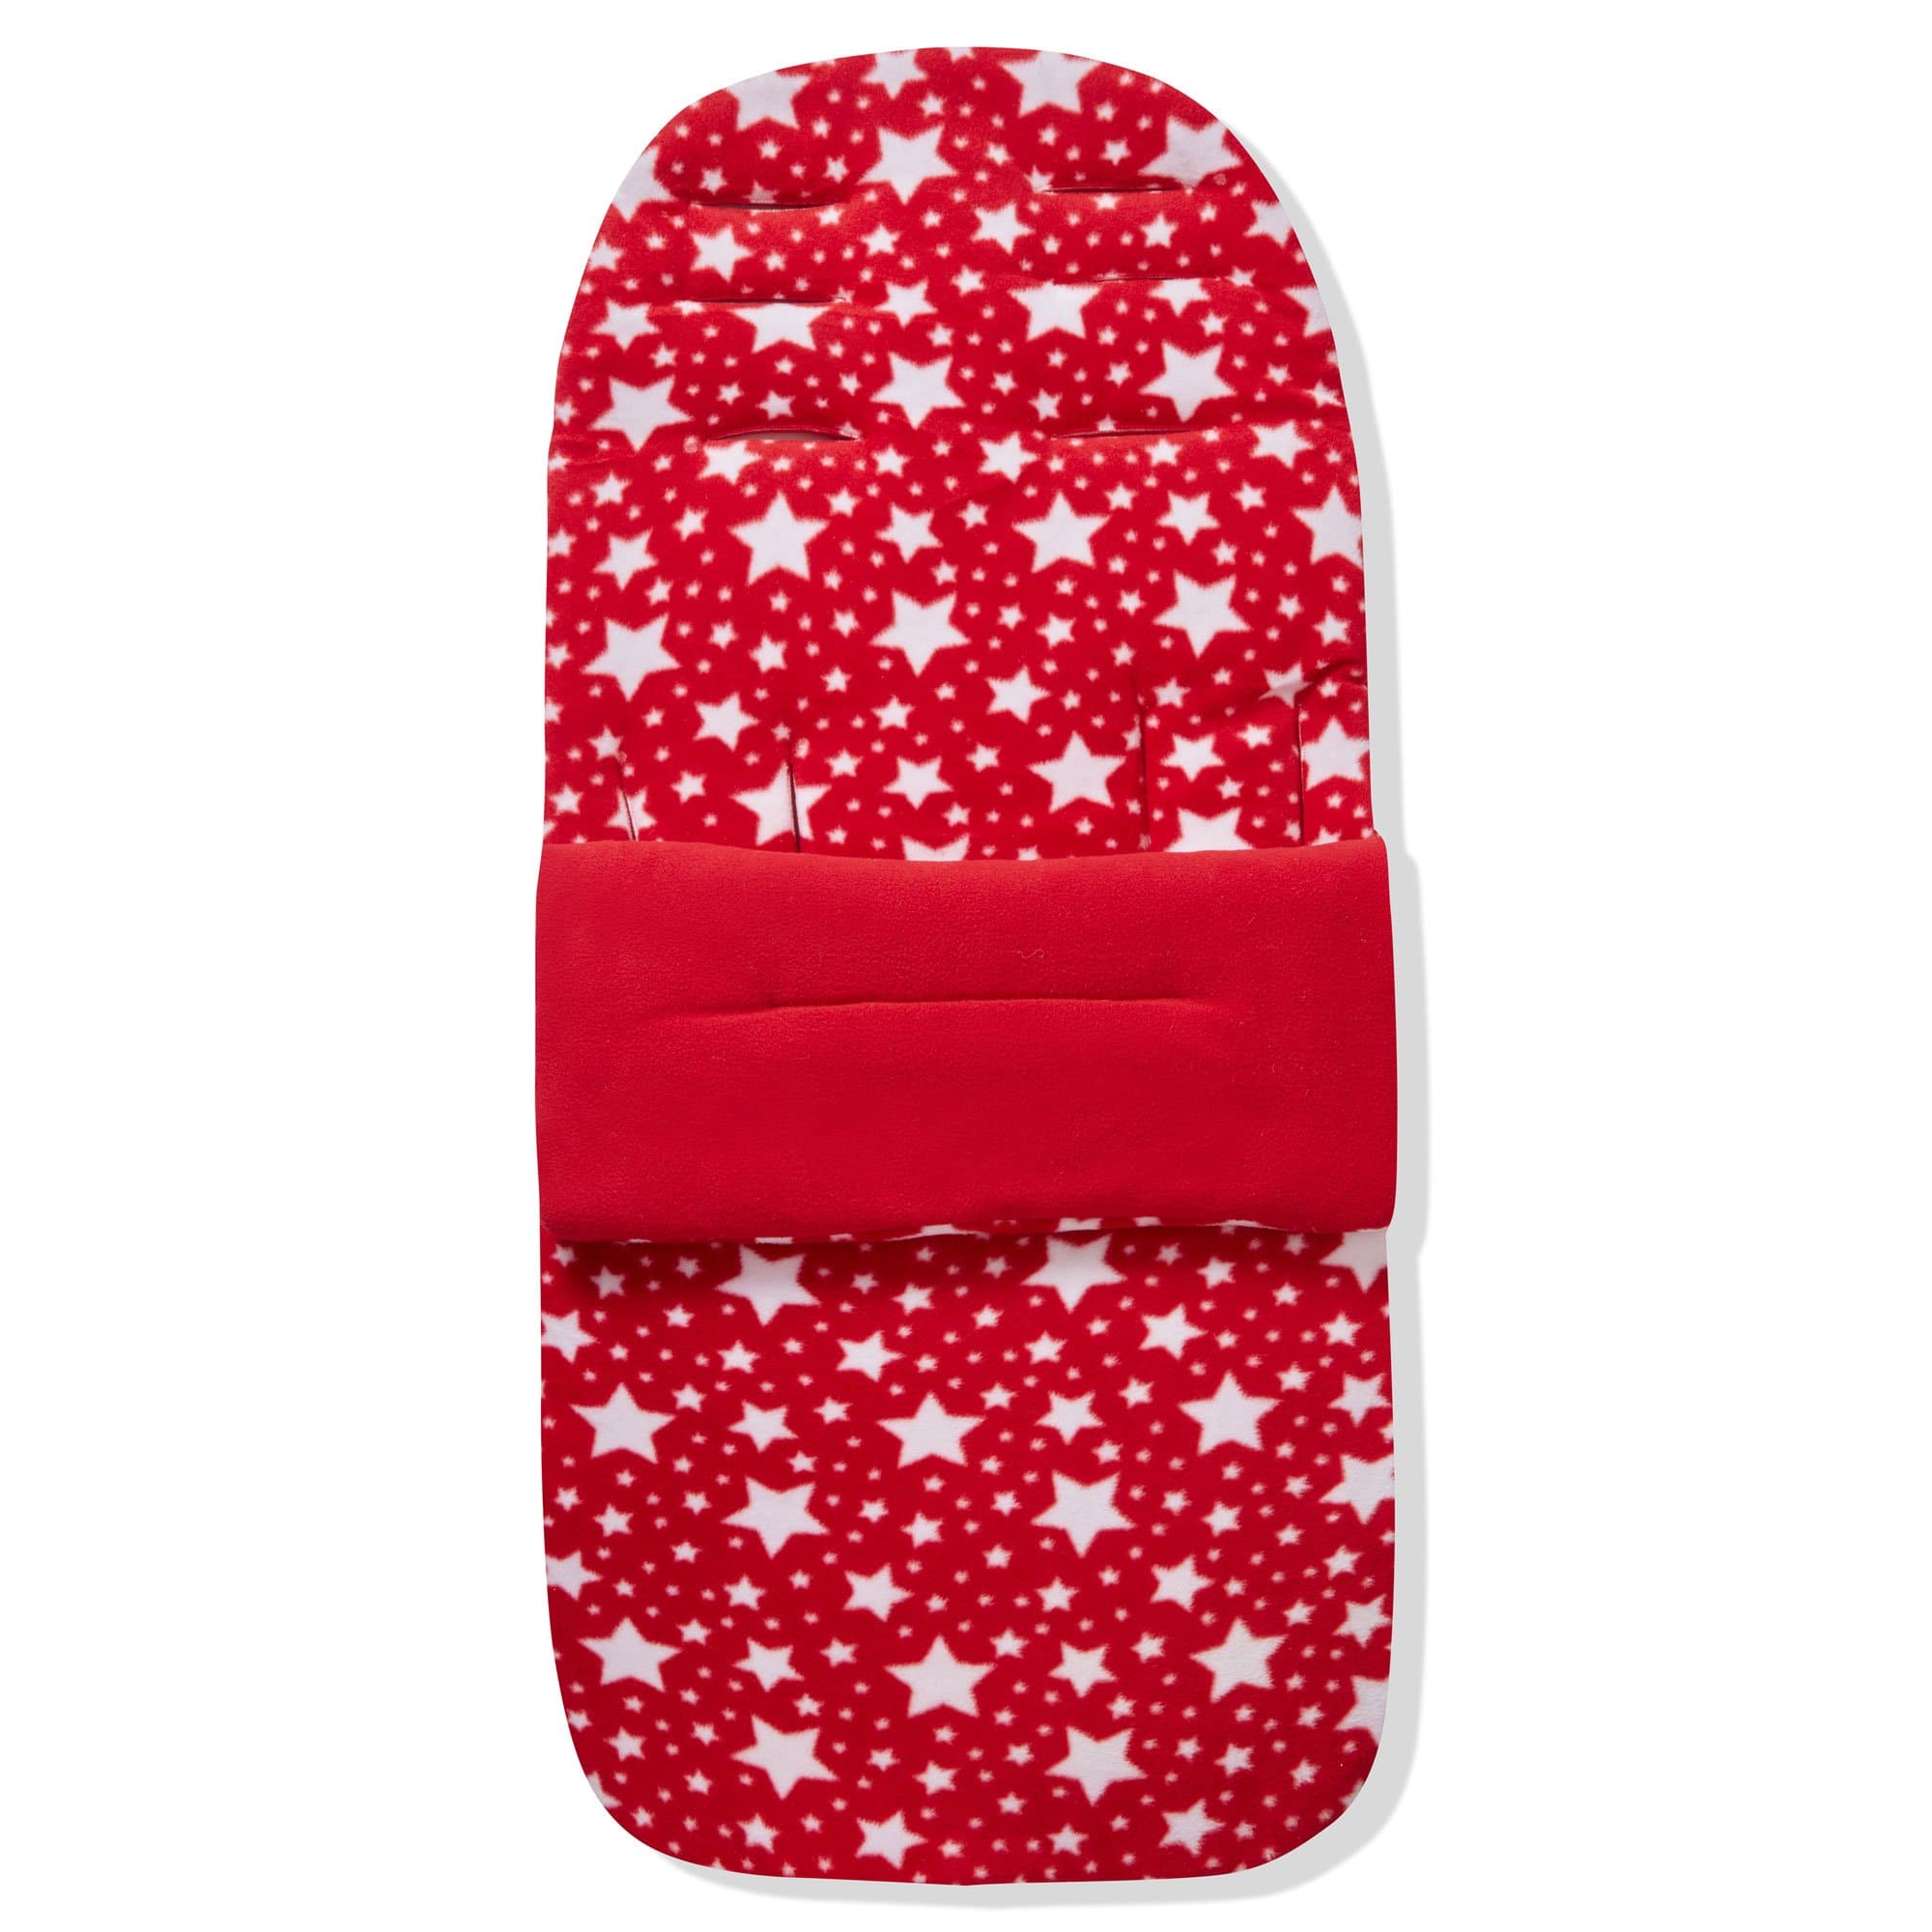 Fleece Footmuff / Cosy Toes Compatible with Zooper - Red Star / Fits All Models | For Your Little One